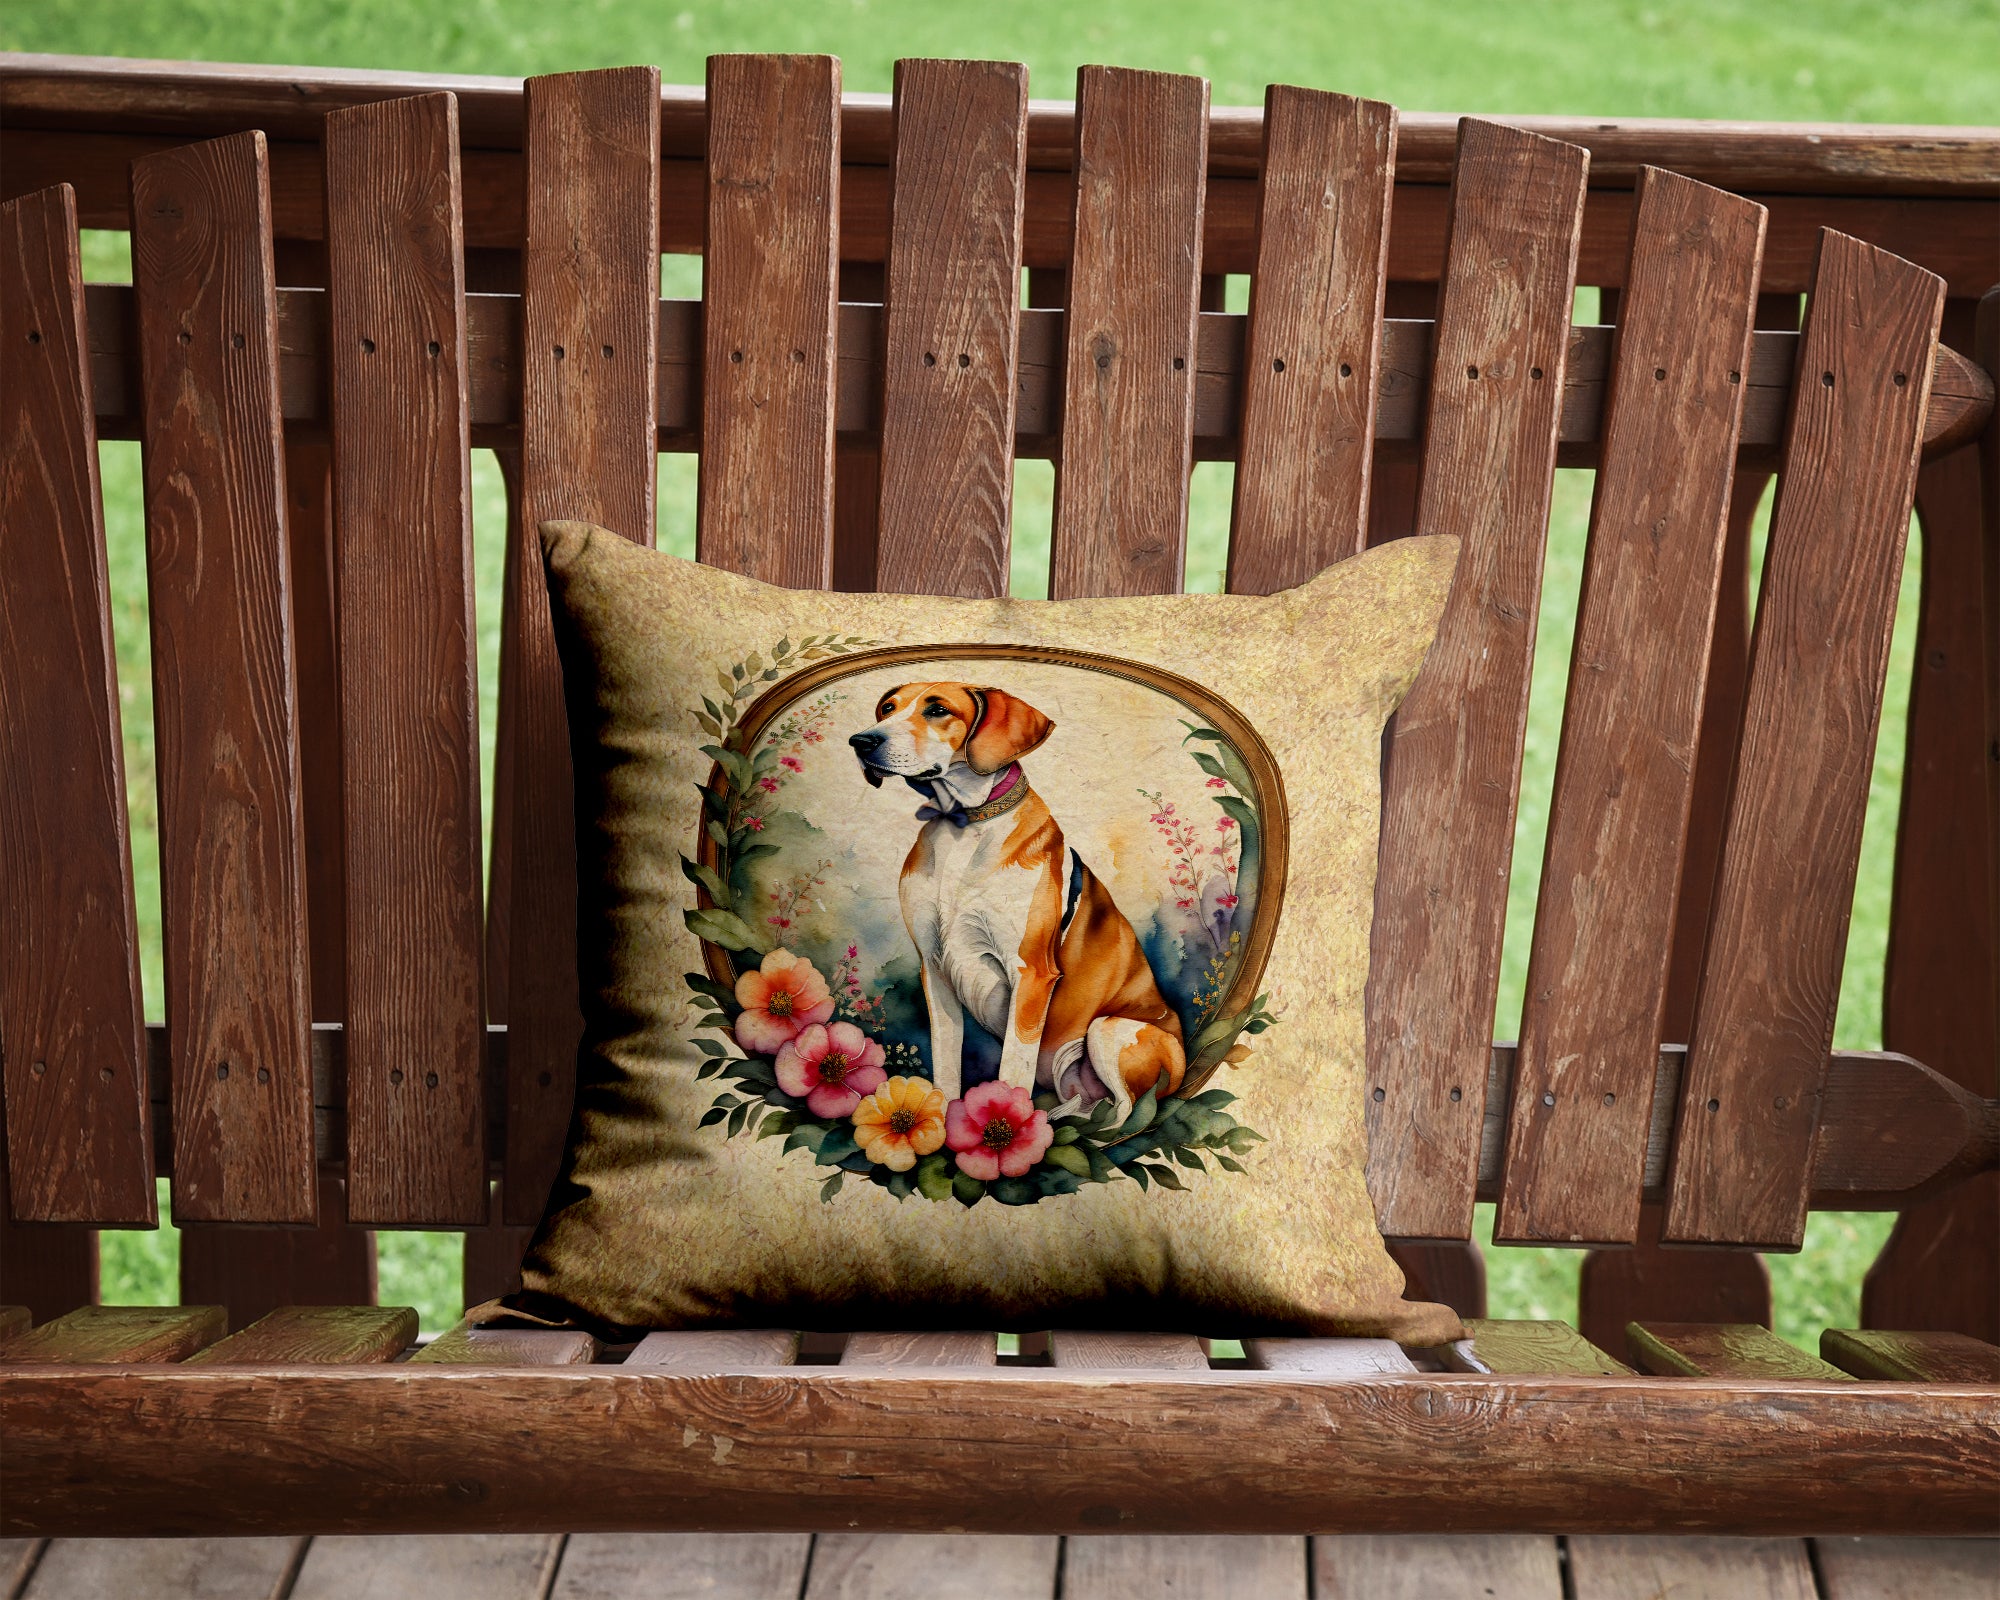 English Foxhound and Flowers Fabric Decorative Pillow